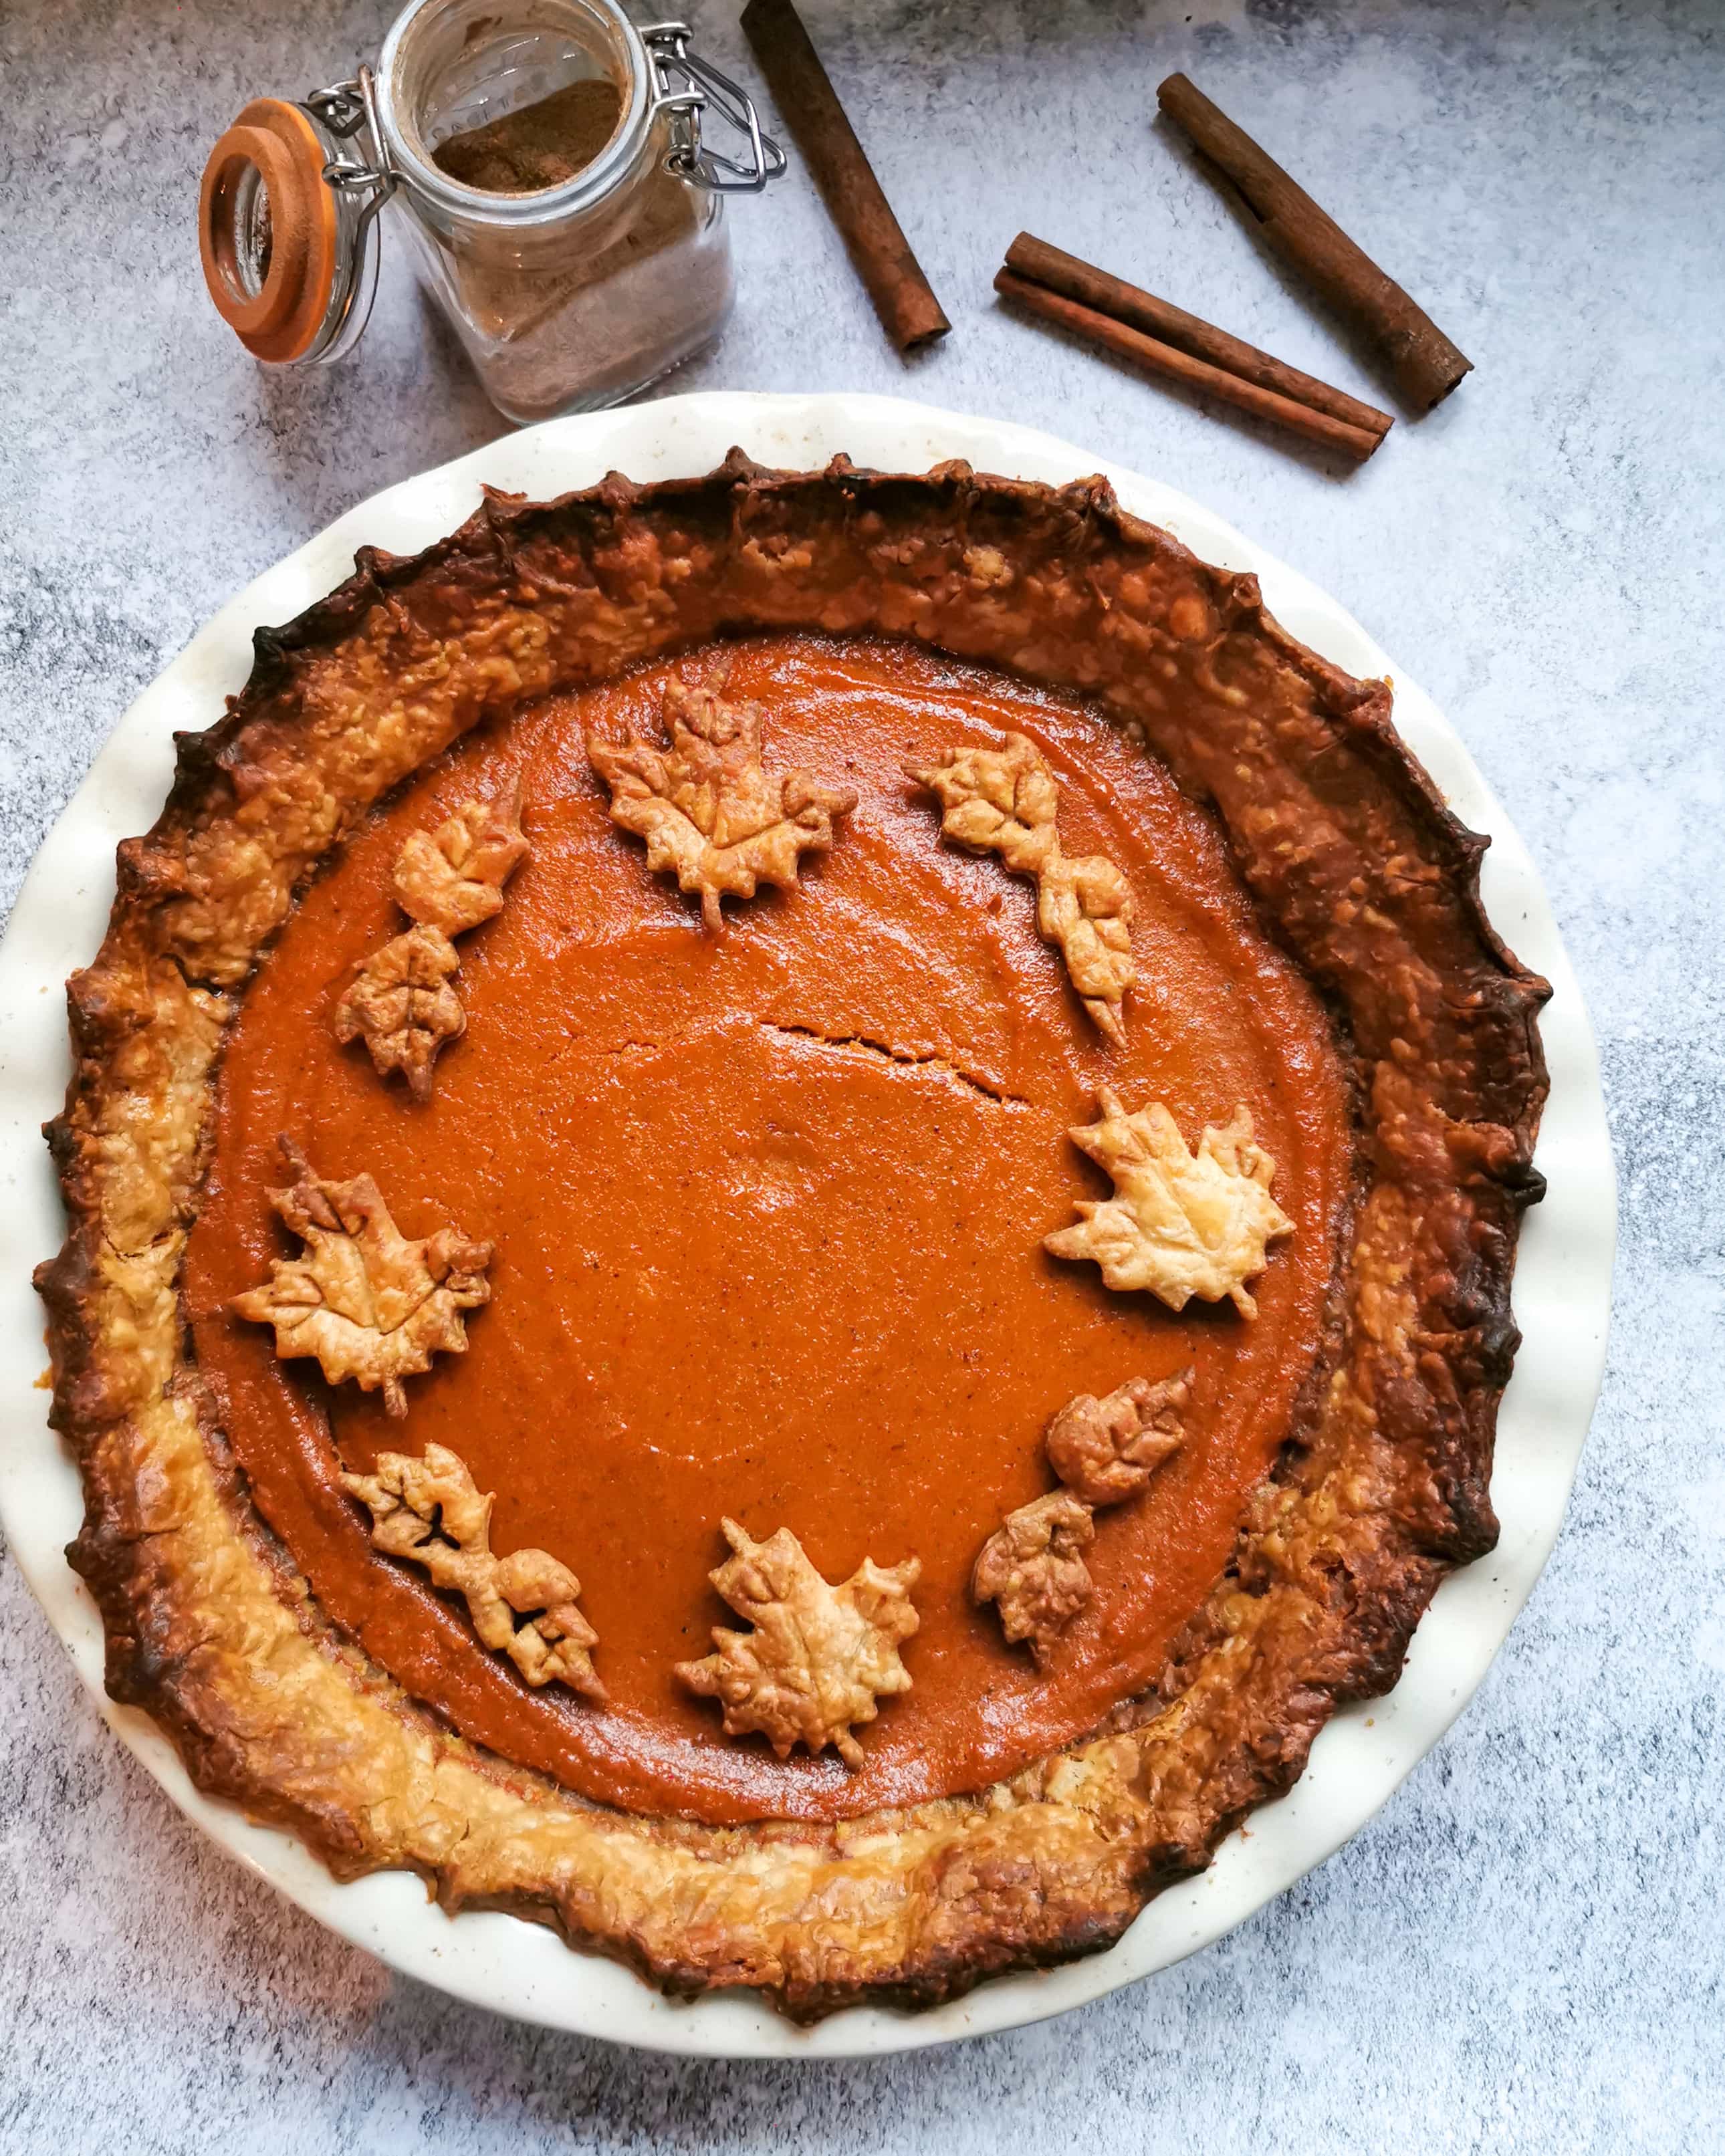 A pumpkin pie decorated with pastry leaves on a white and grey background